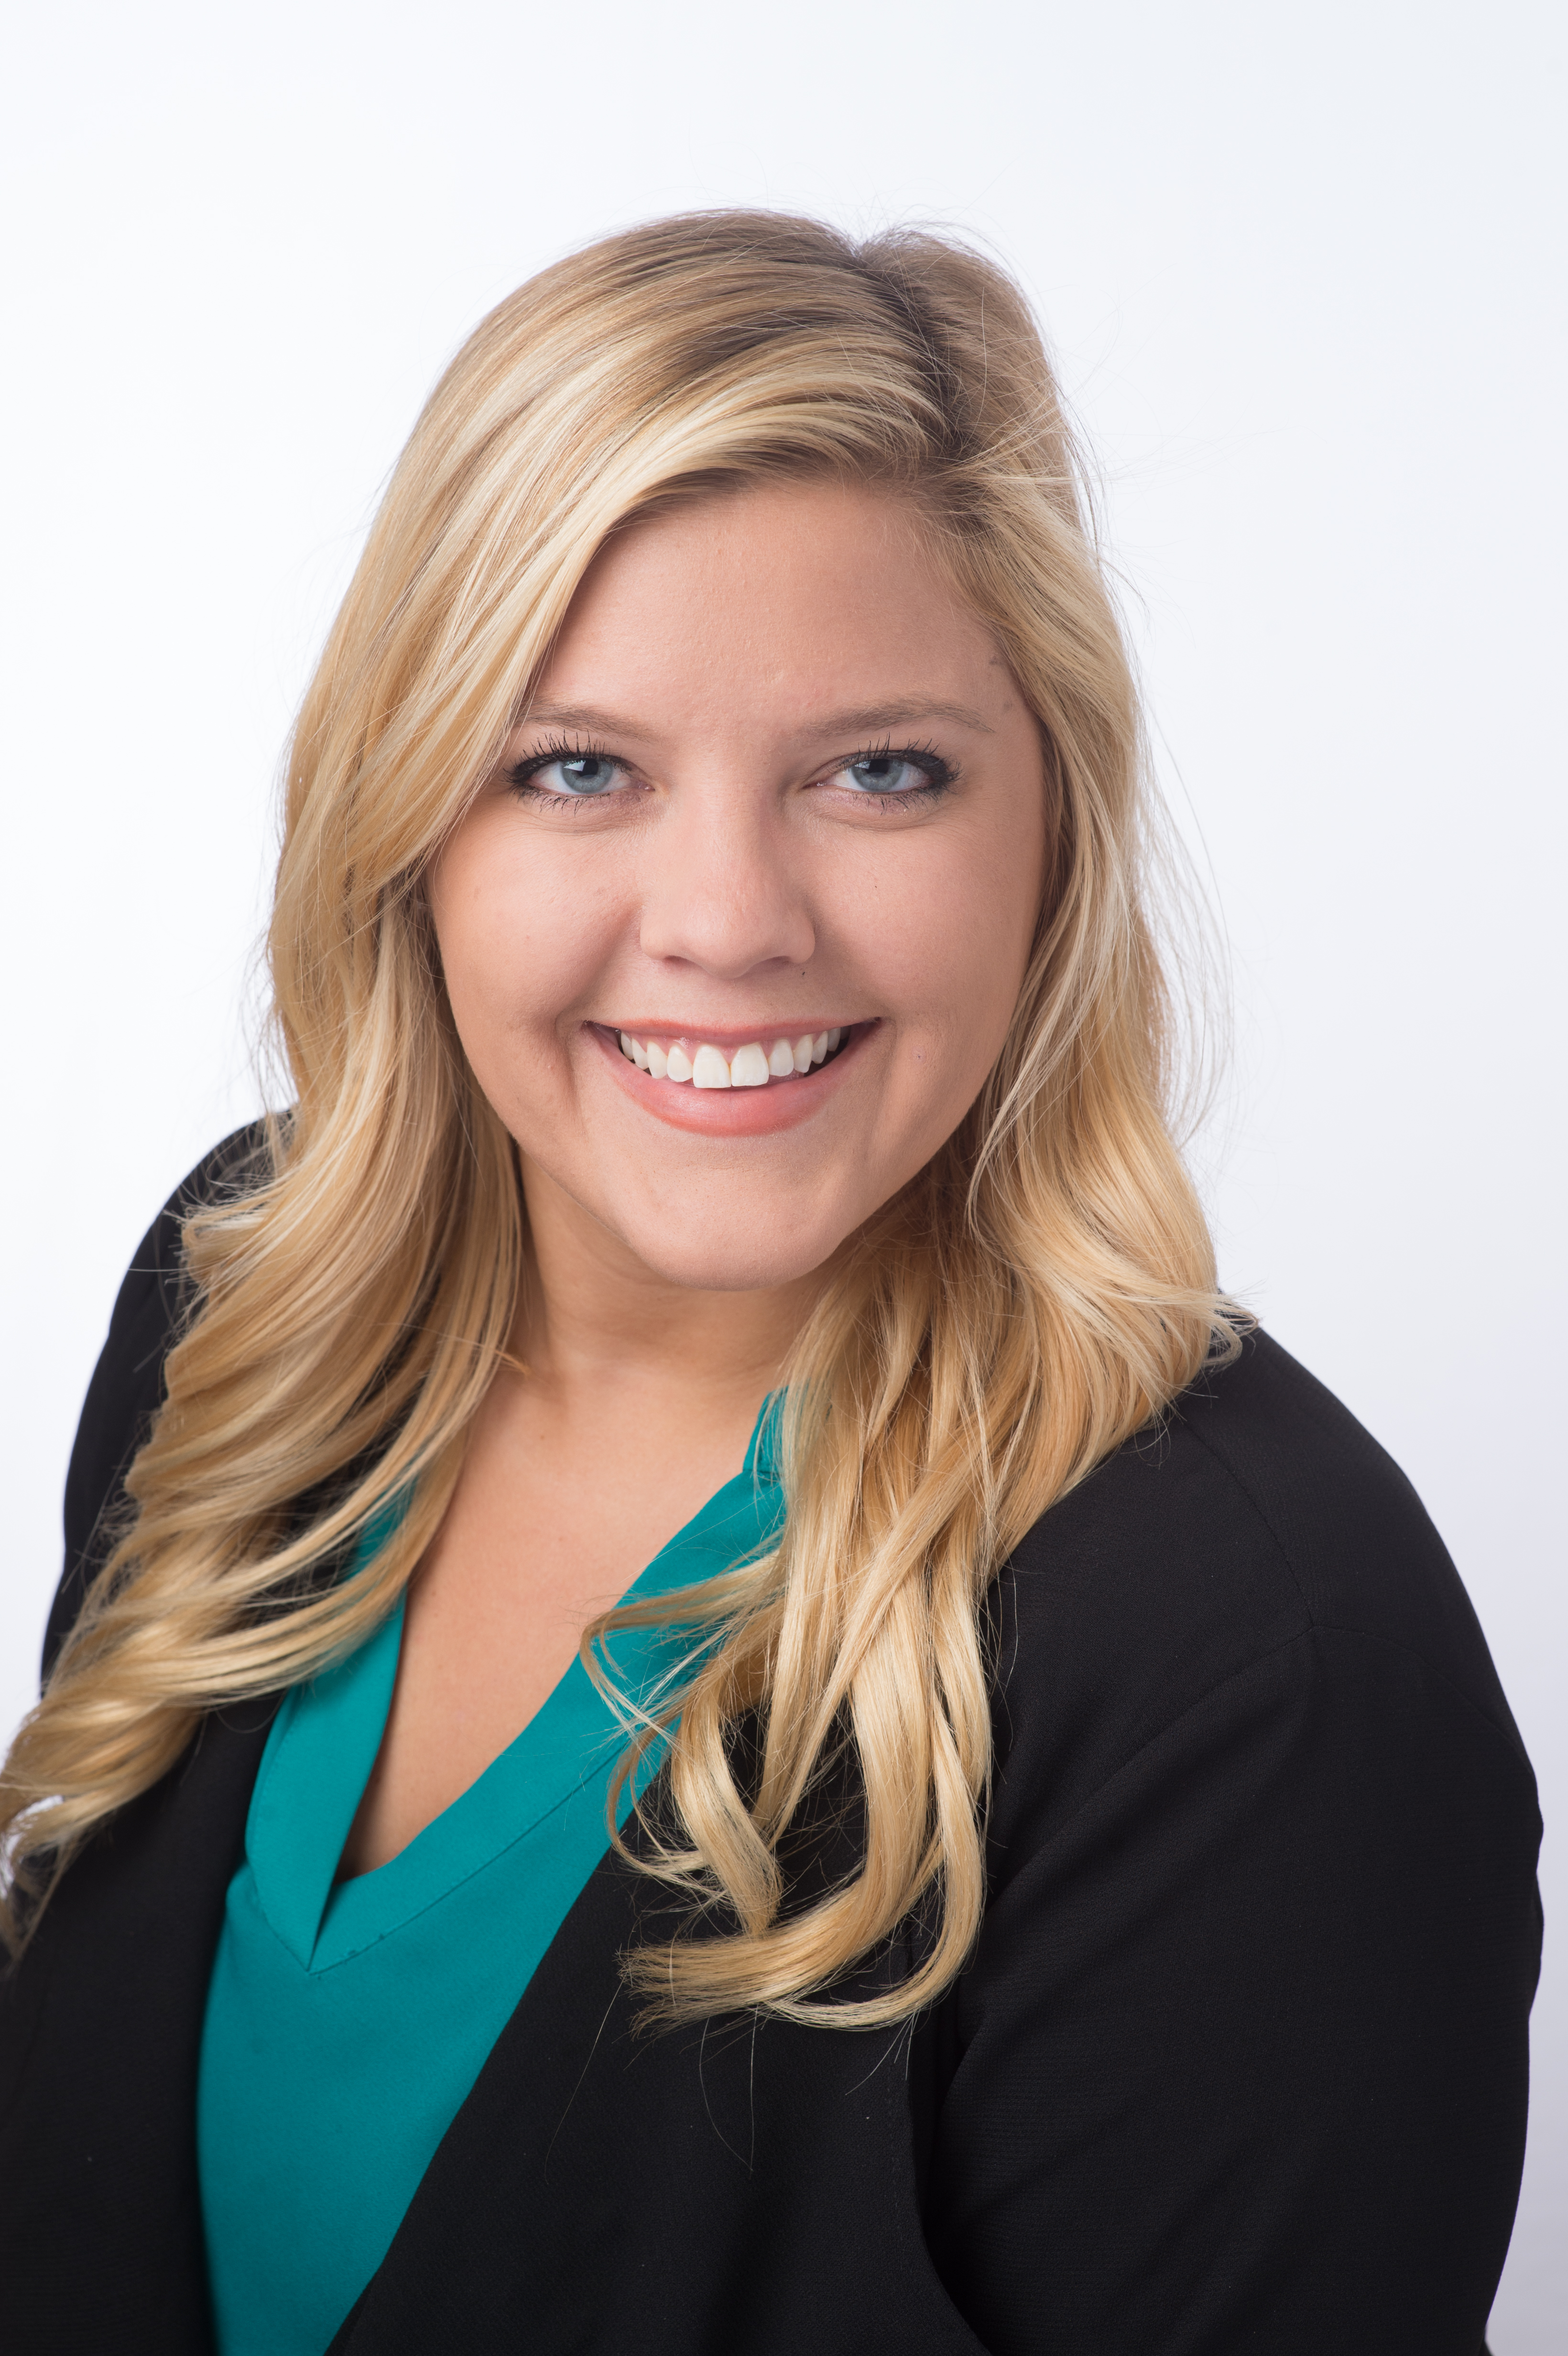 Portrait of Morgan Horsley, Most Units Sold | Property Manager | REALTOR®️ | Top 25 Under 35 Agent in Orlando .